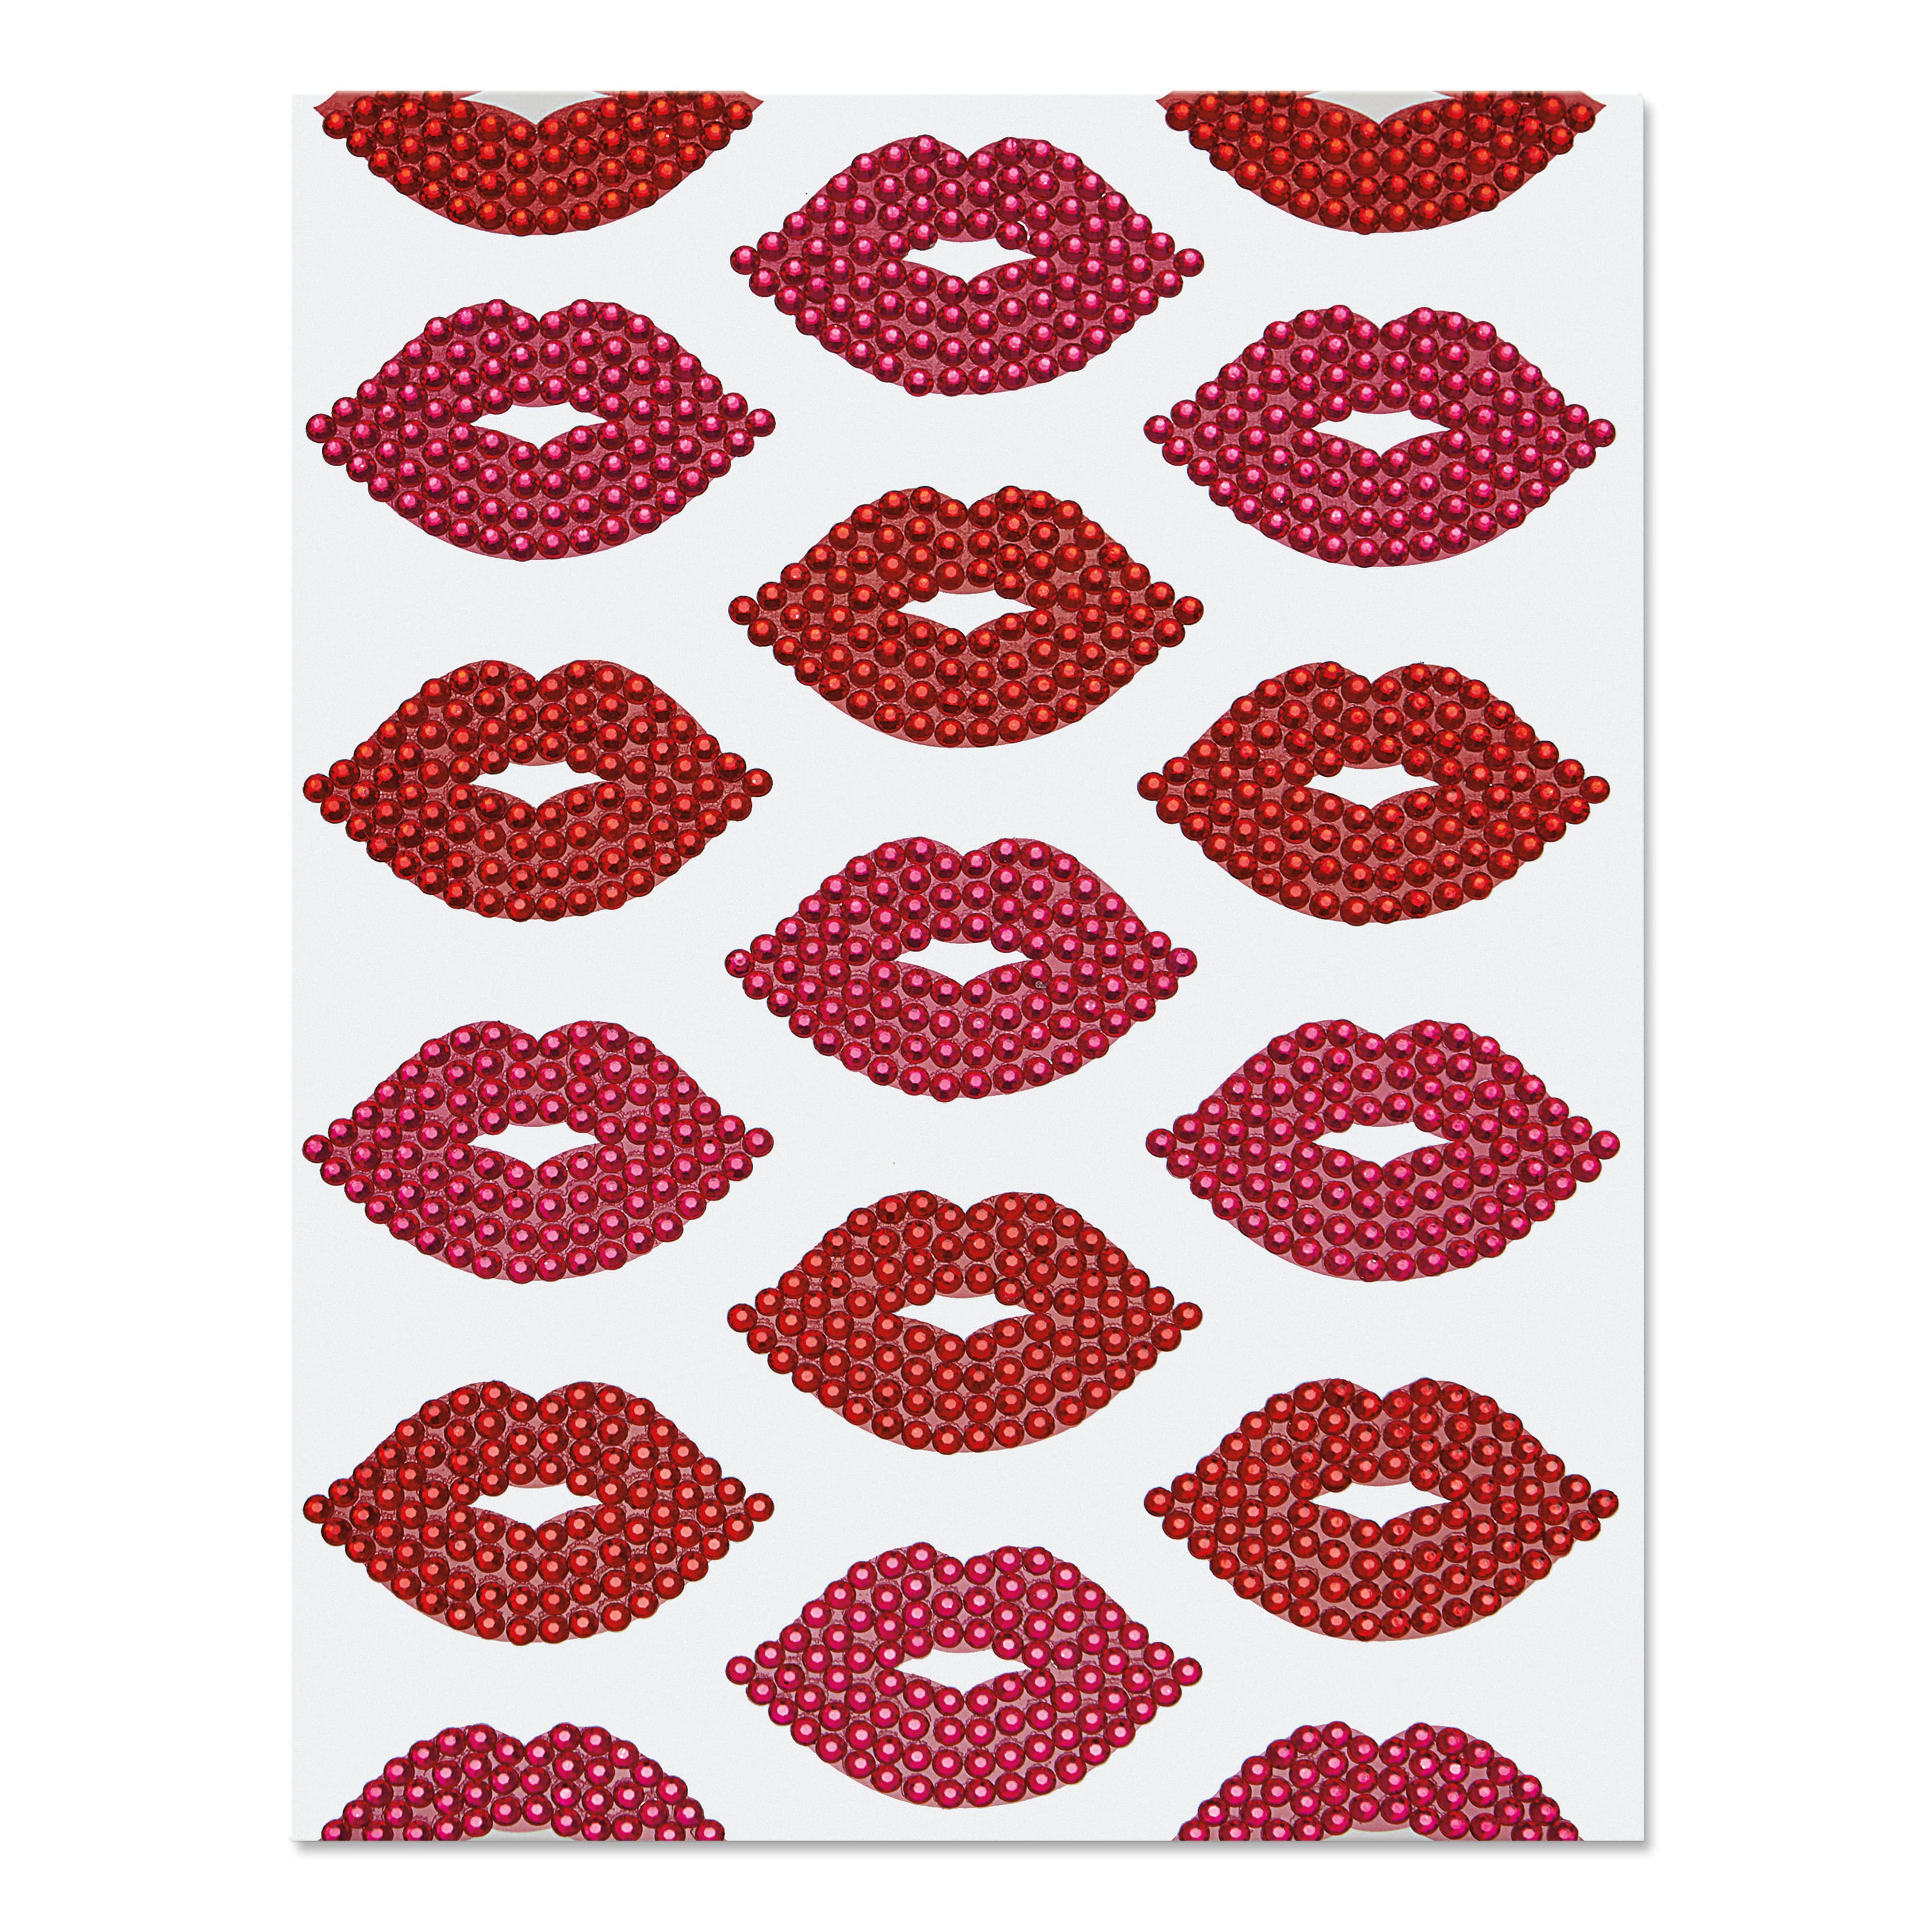  WUSARPLY Valentine's Day Diamond Painting Kits for